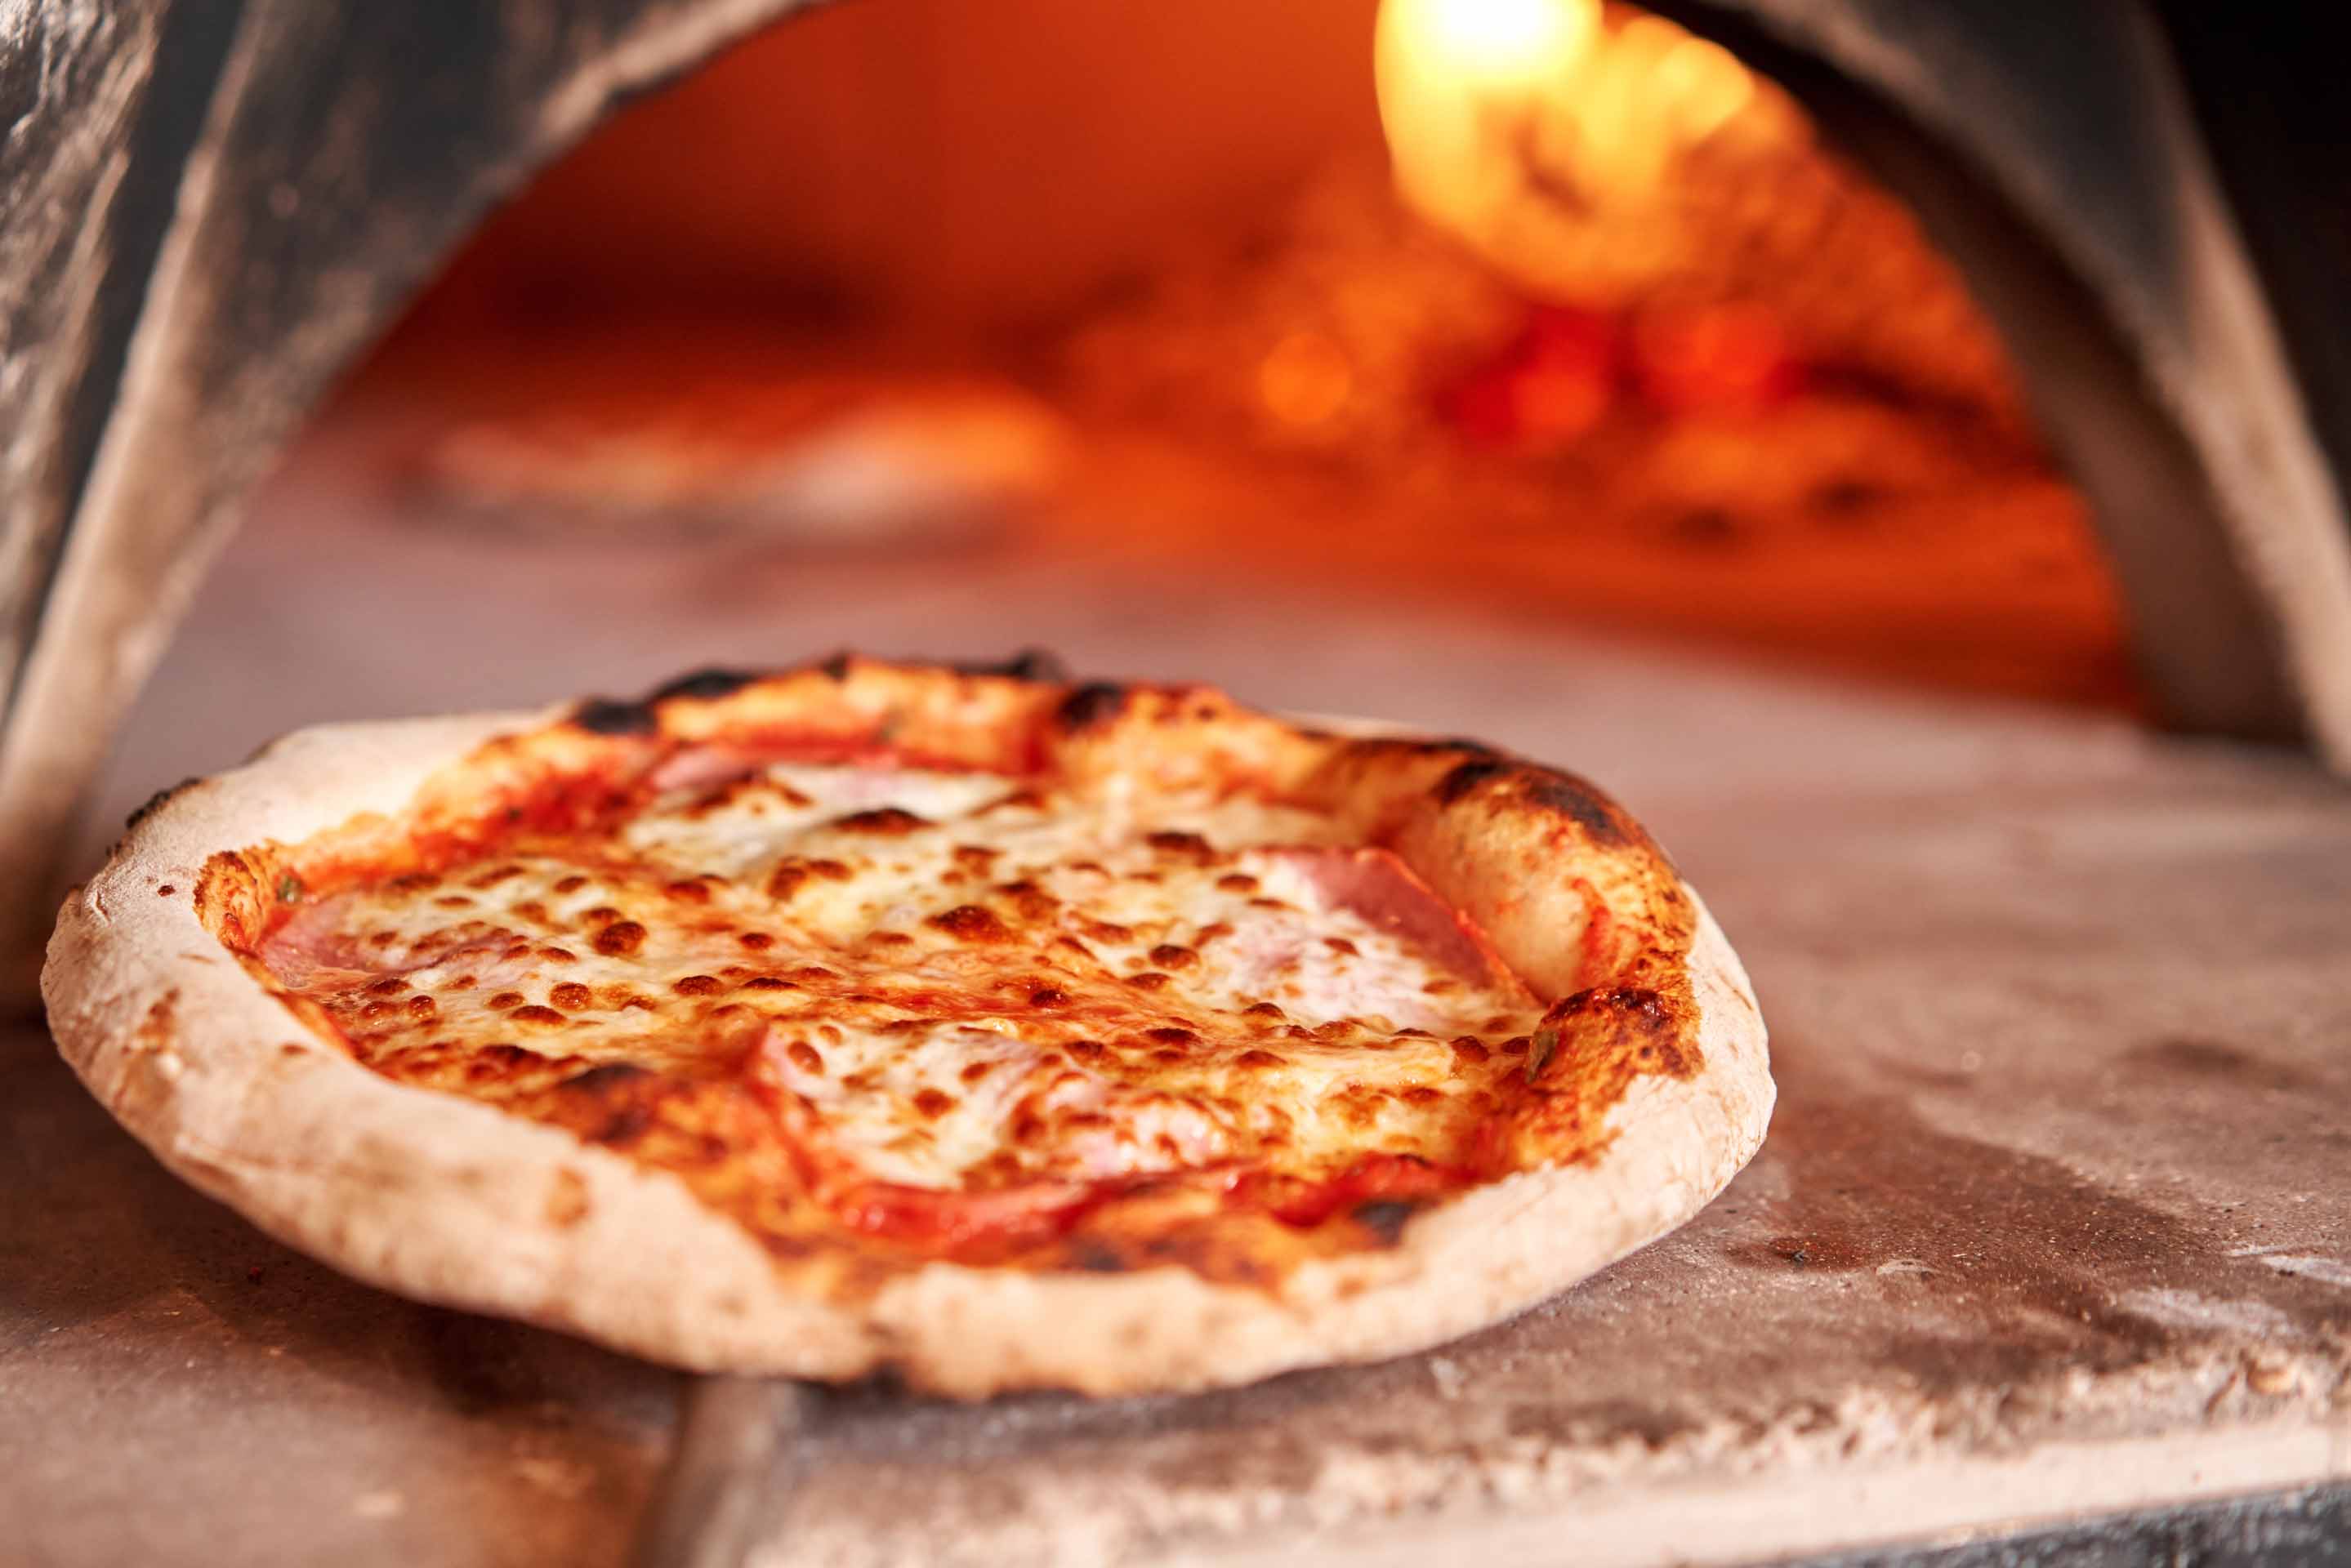 A woodfired pizza